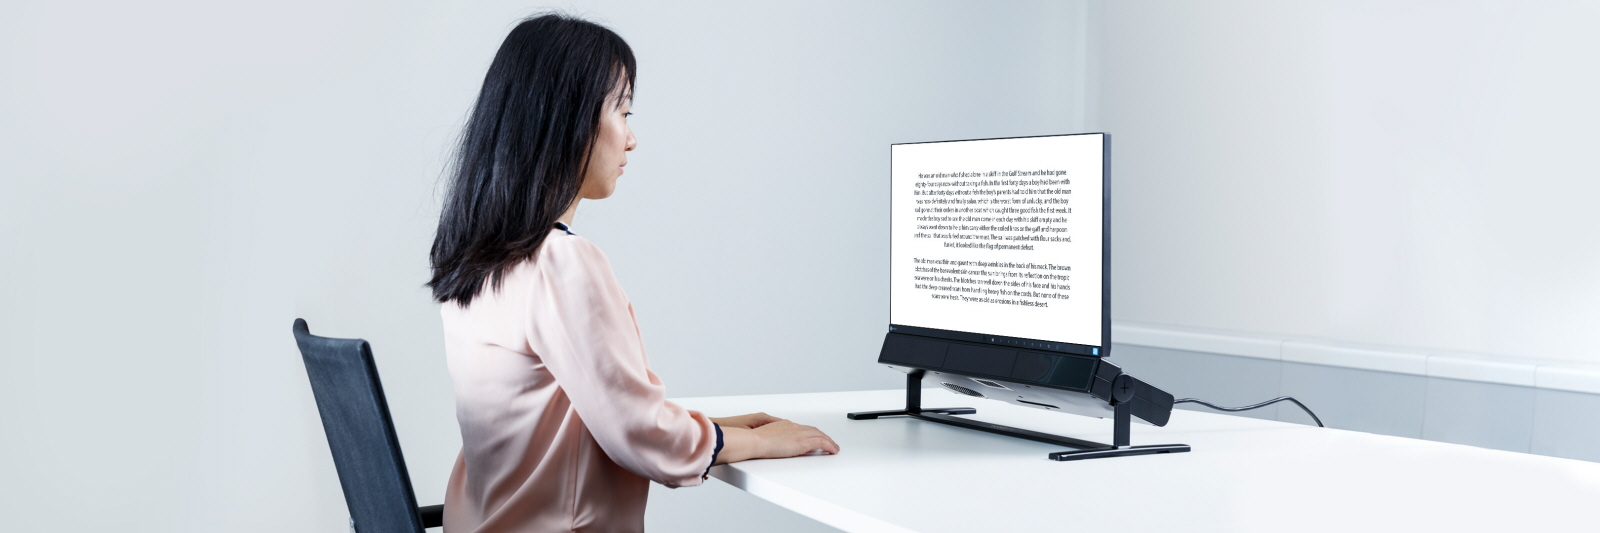 Tobii Pro Spectrum eye tracker is used for reading research